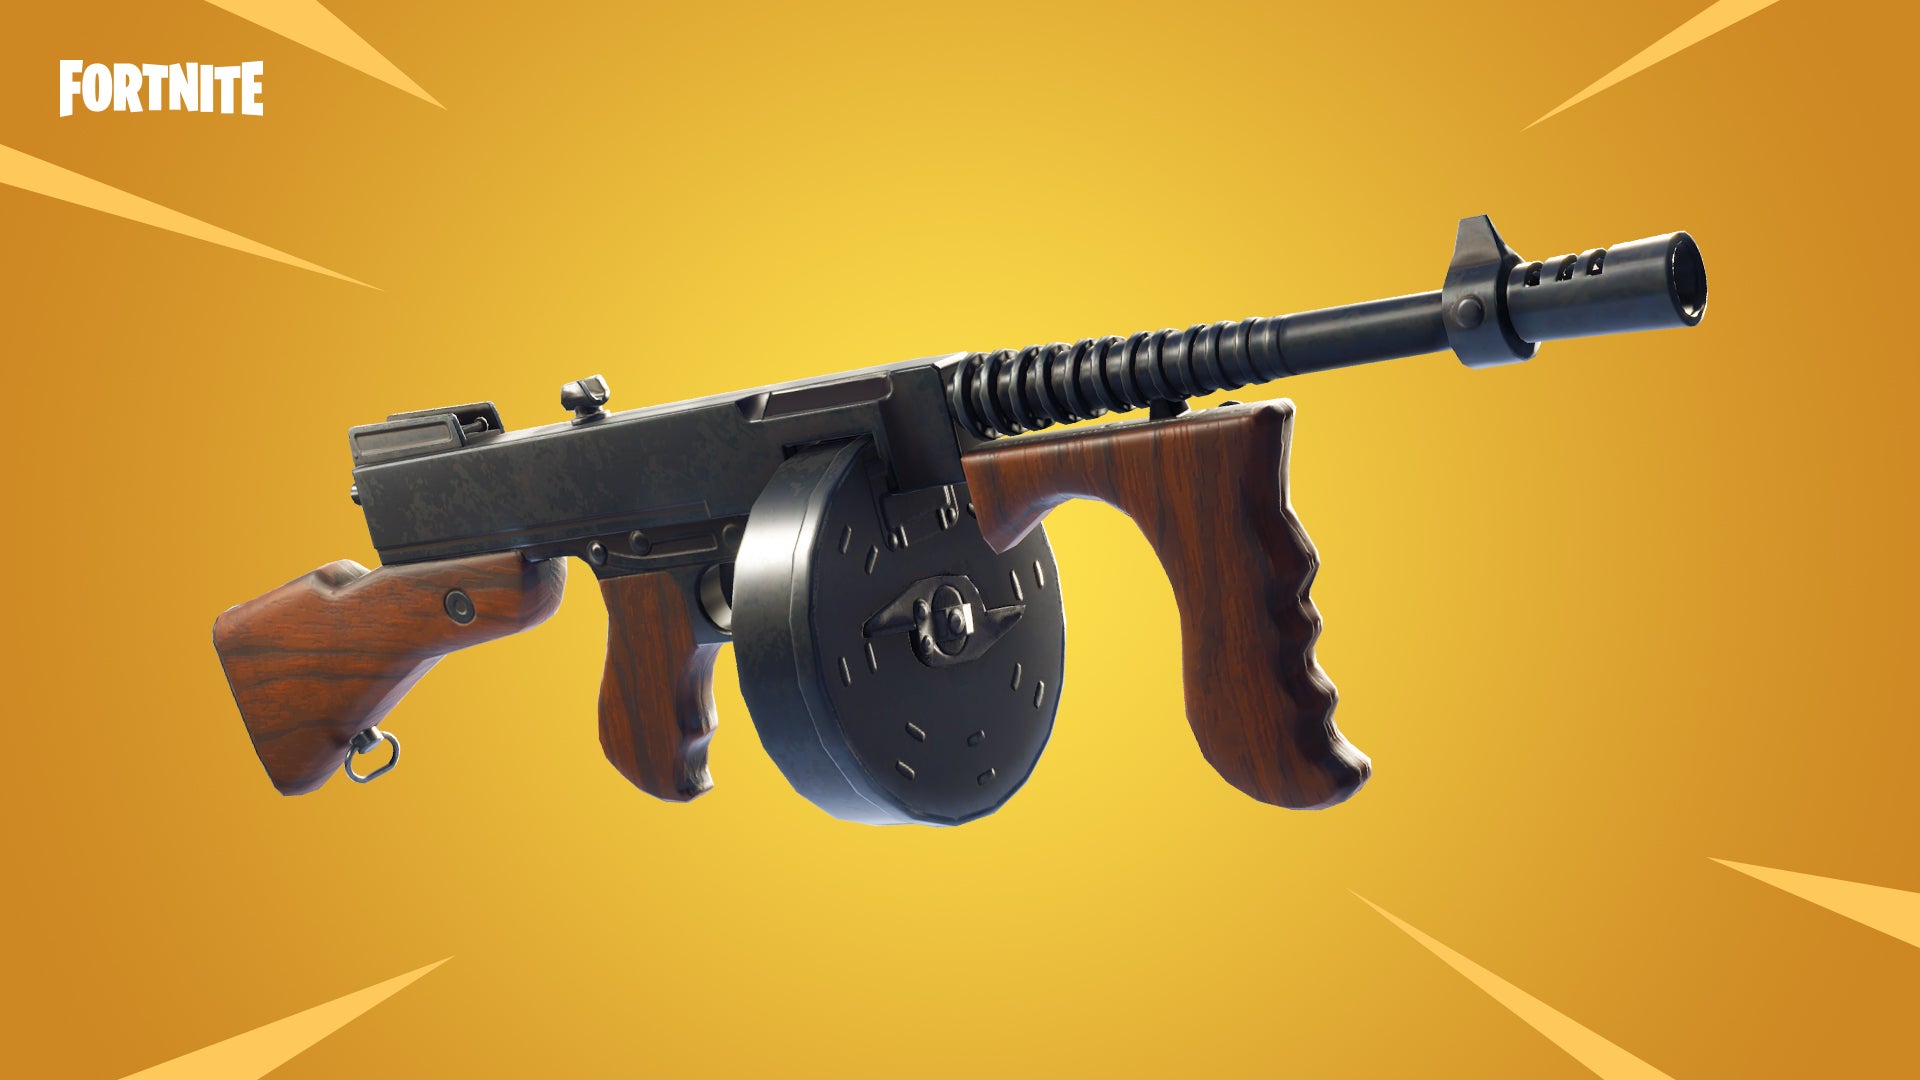 Image for The Fortnite Unvaulted Event brought back the Drum Gun and destroyed Tilted Towers